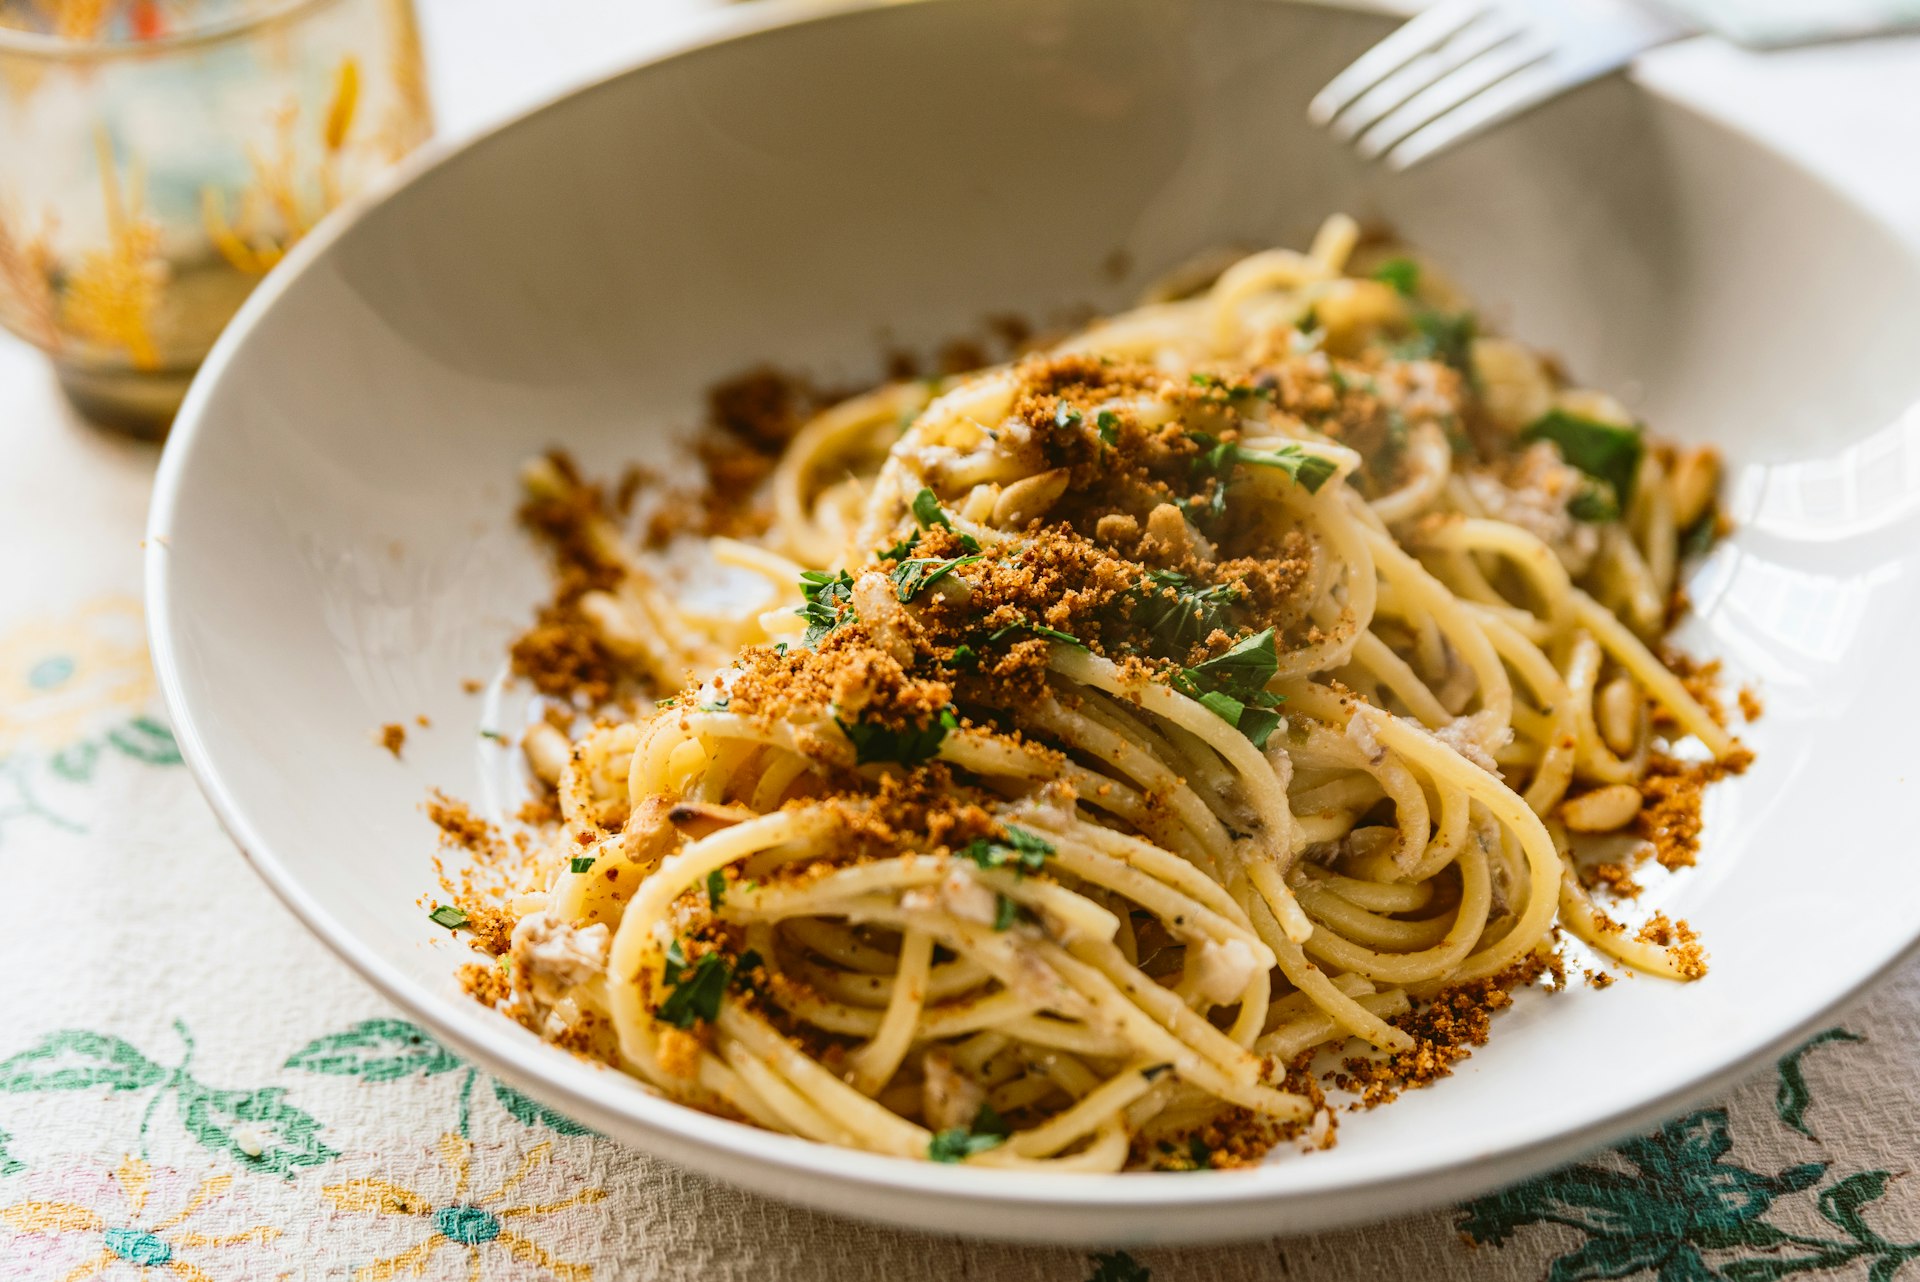 homemade italian pasta dish known as "pasta con le sarde" on table cloth, made with spaghetti, sardines, parsley, pine nuts and breadcrumbs. Classic italian regional cuisine.